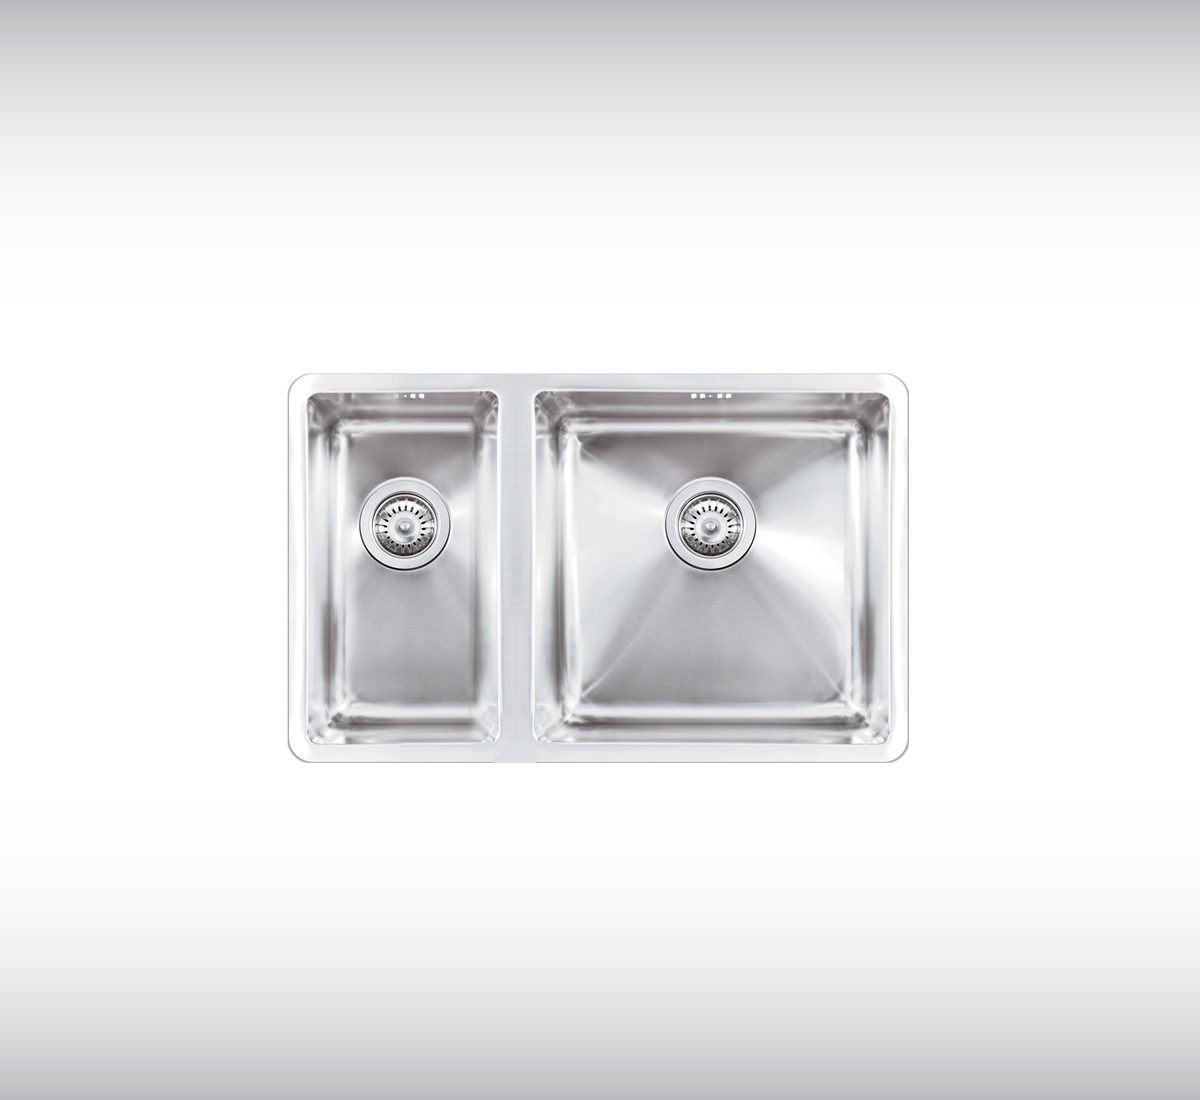 Stainless Steel Sink GINO-615R